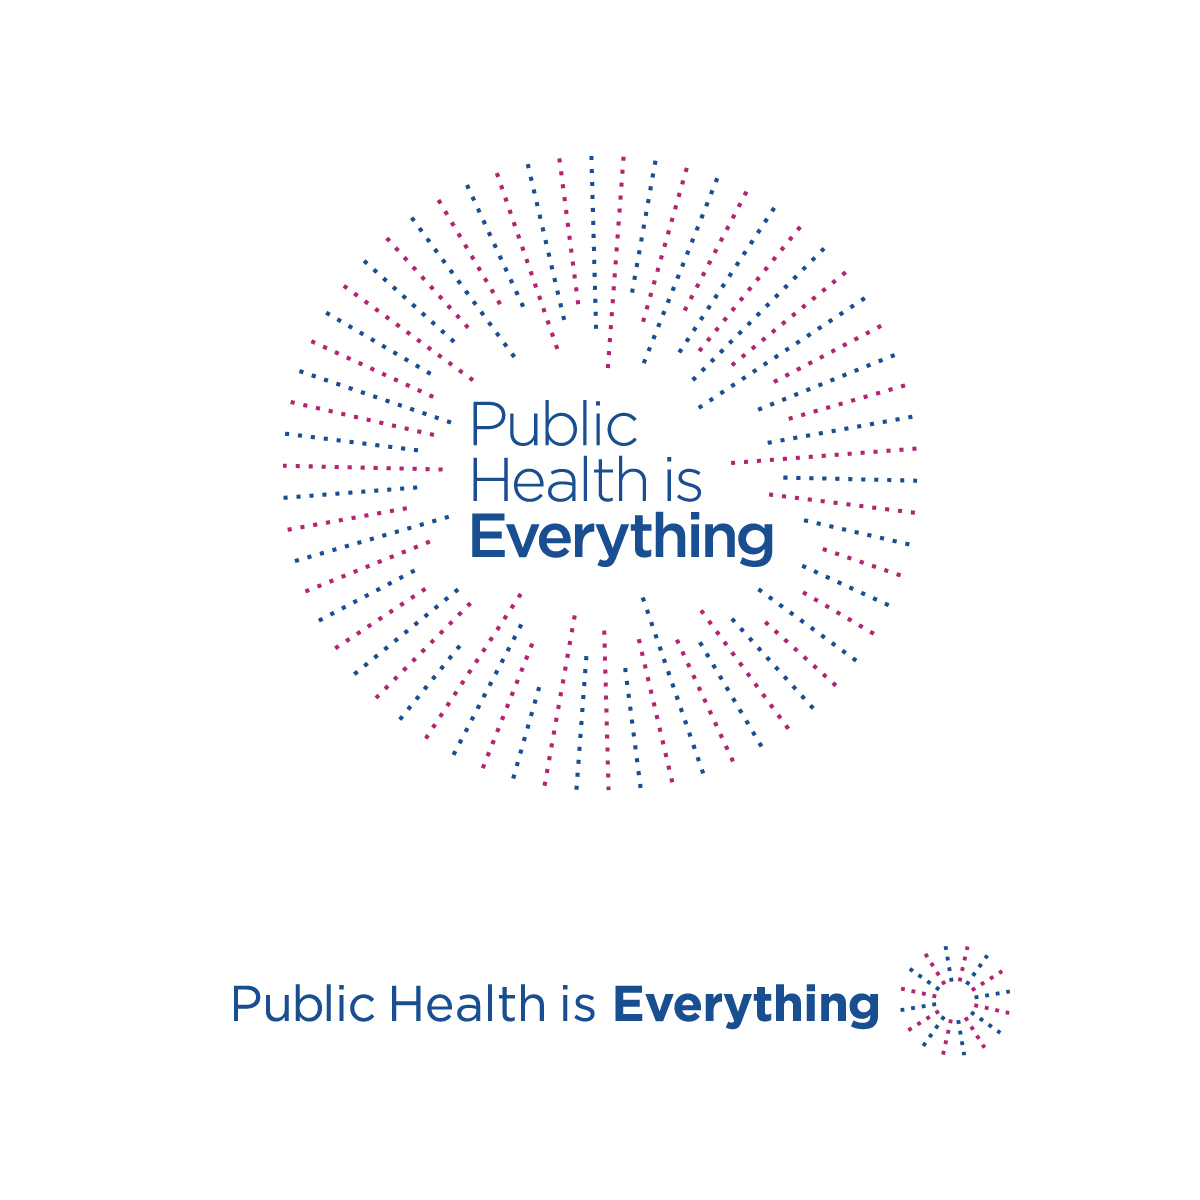 Simplified Public Health is Everything campaign logos